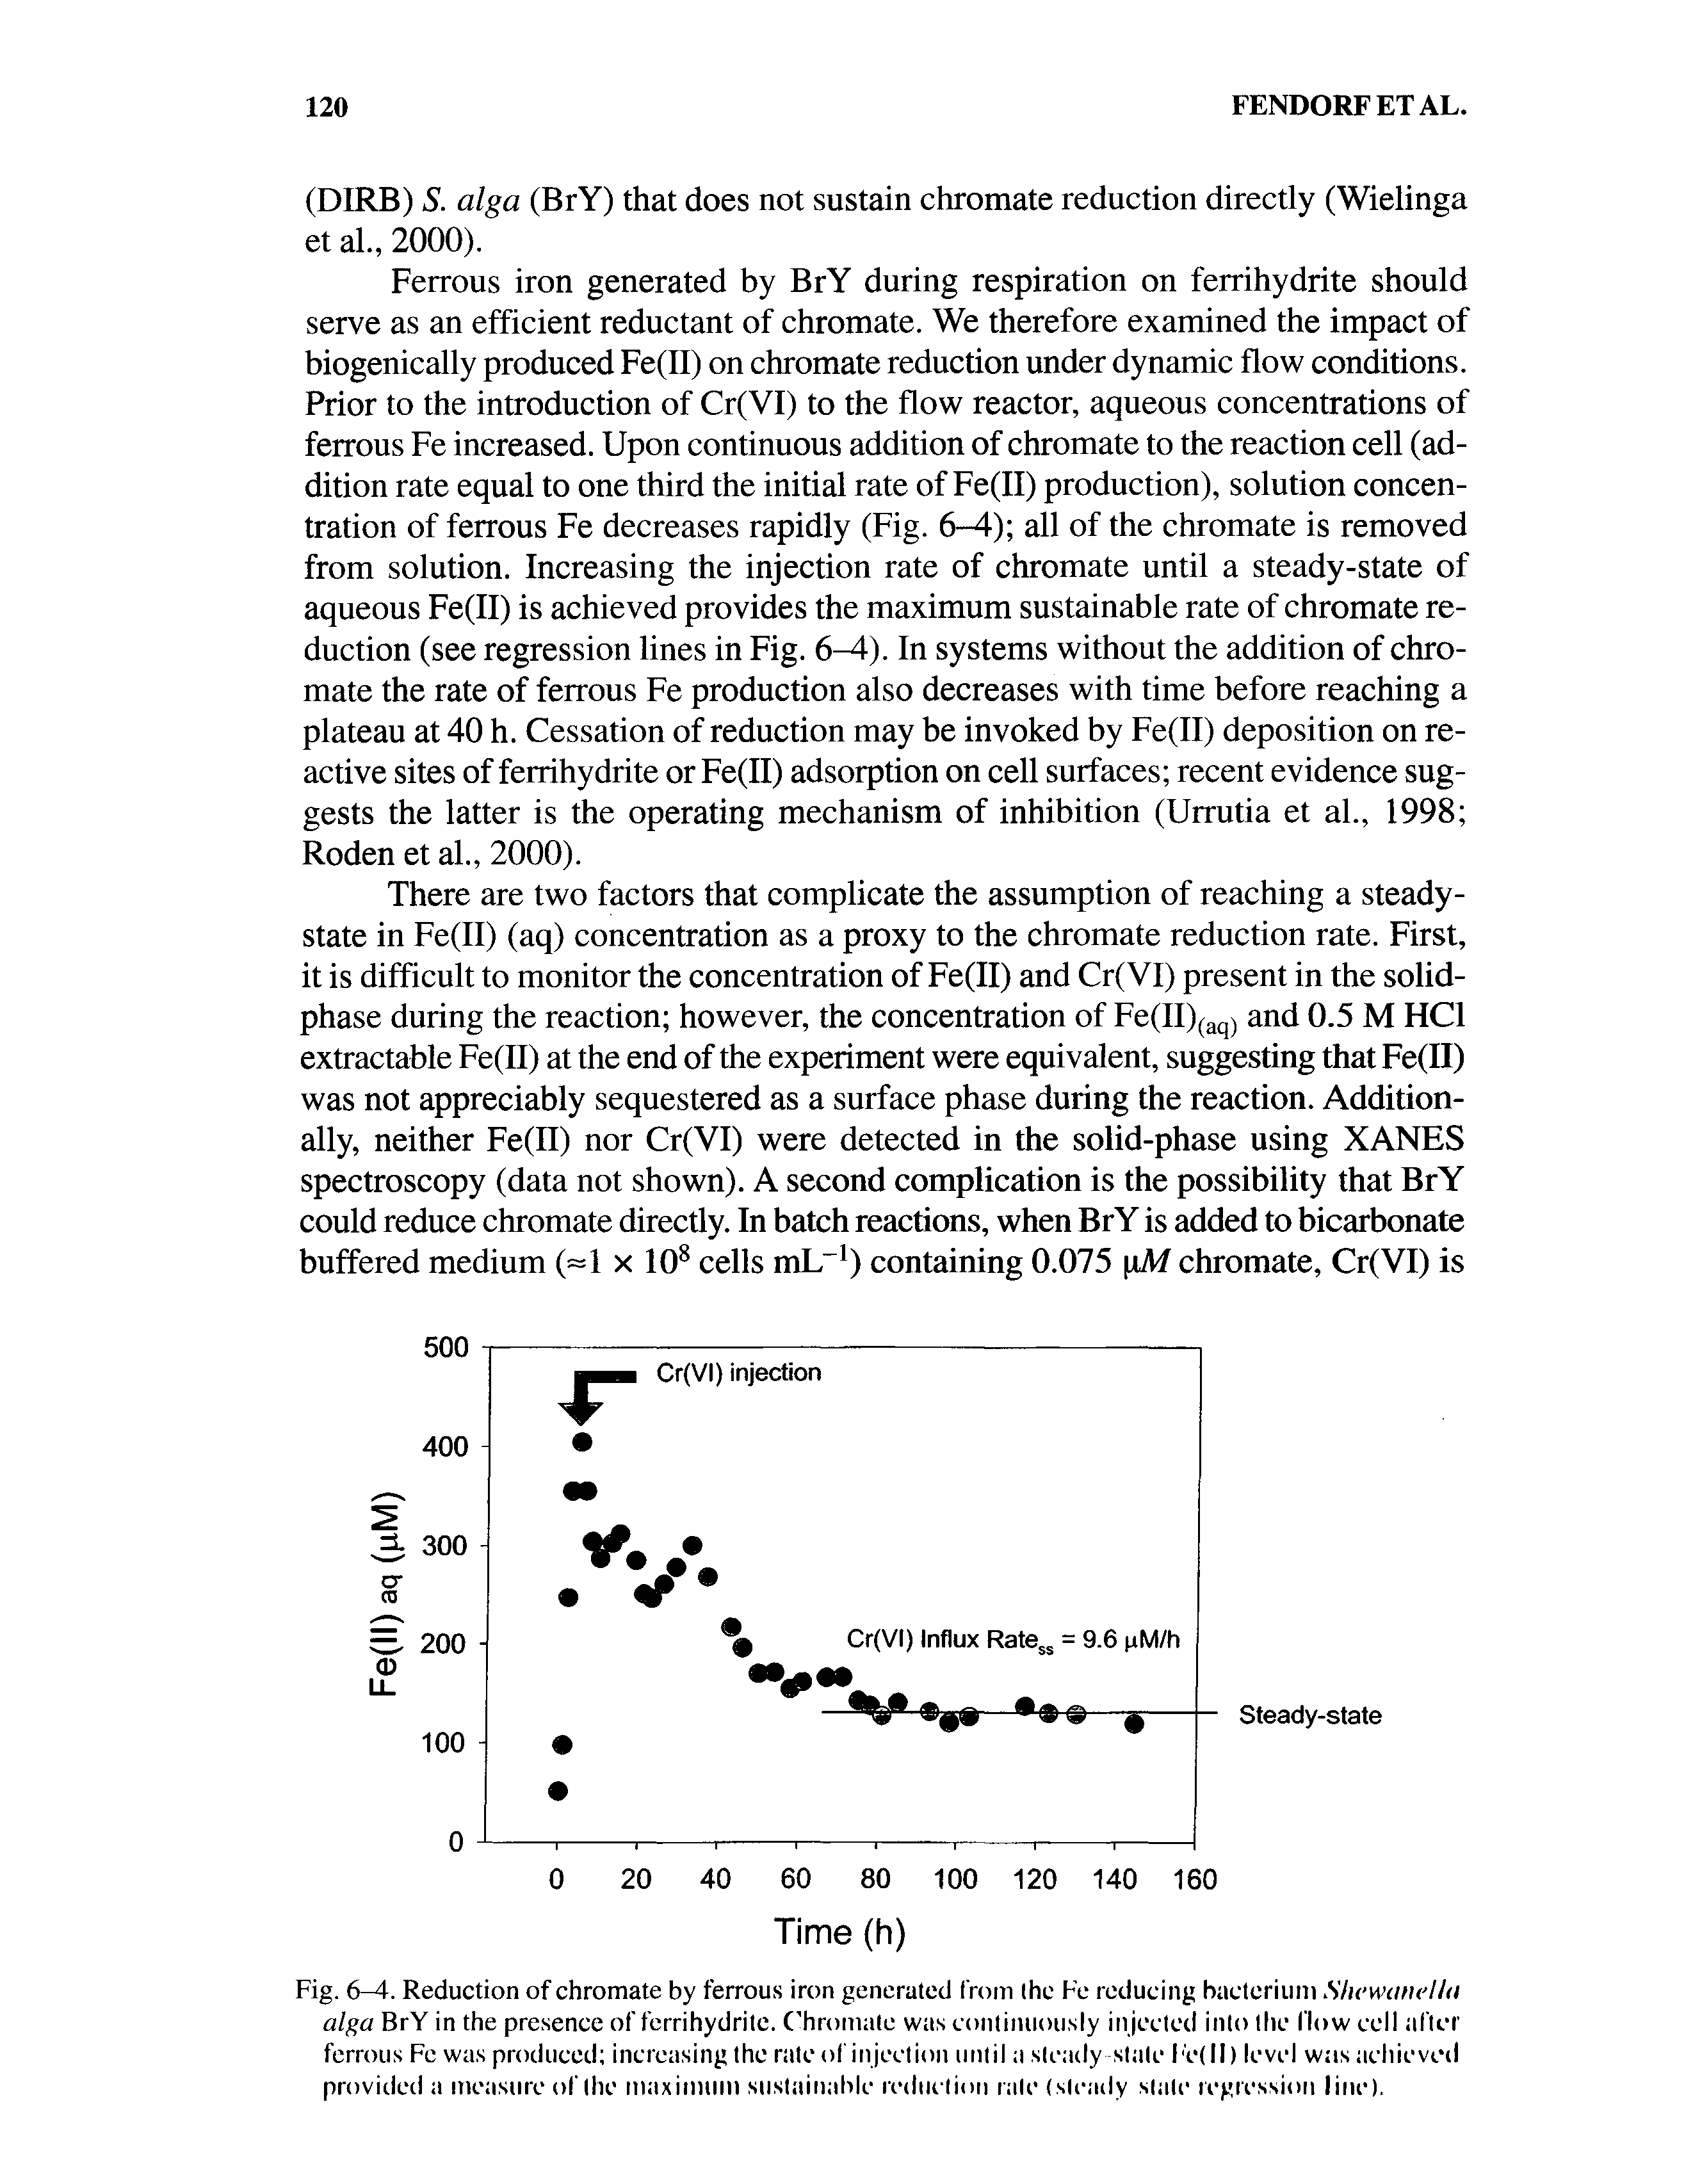 Fig. 6-4. Reduction of chromate by ferrous iron generated from (he Fe reducing bacterium ShewemeUtt alga BrY in the presence of ferrihydrite. C hromate was continuously injected into (he I low cell after ferrous Fe was produced increasing the rate of injection until a steady state Fe(II) level was achieved provided a measure of (he maximum sustainable rediietion rate (steady state regressioti line).